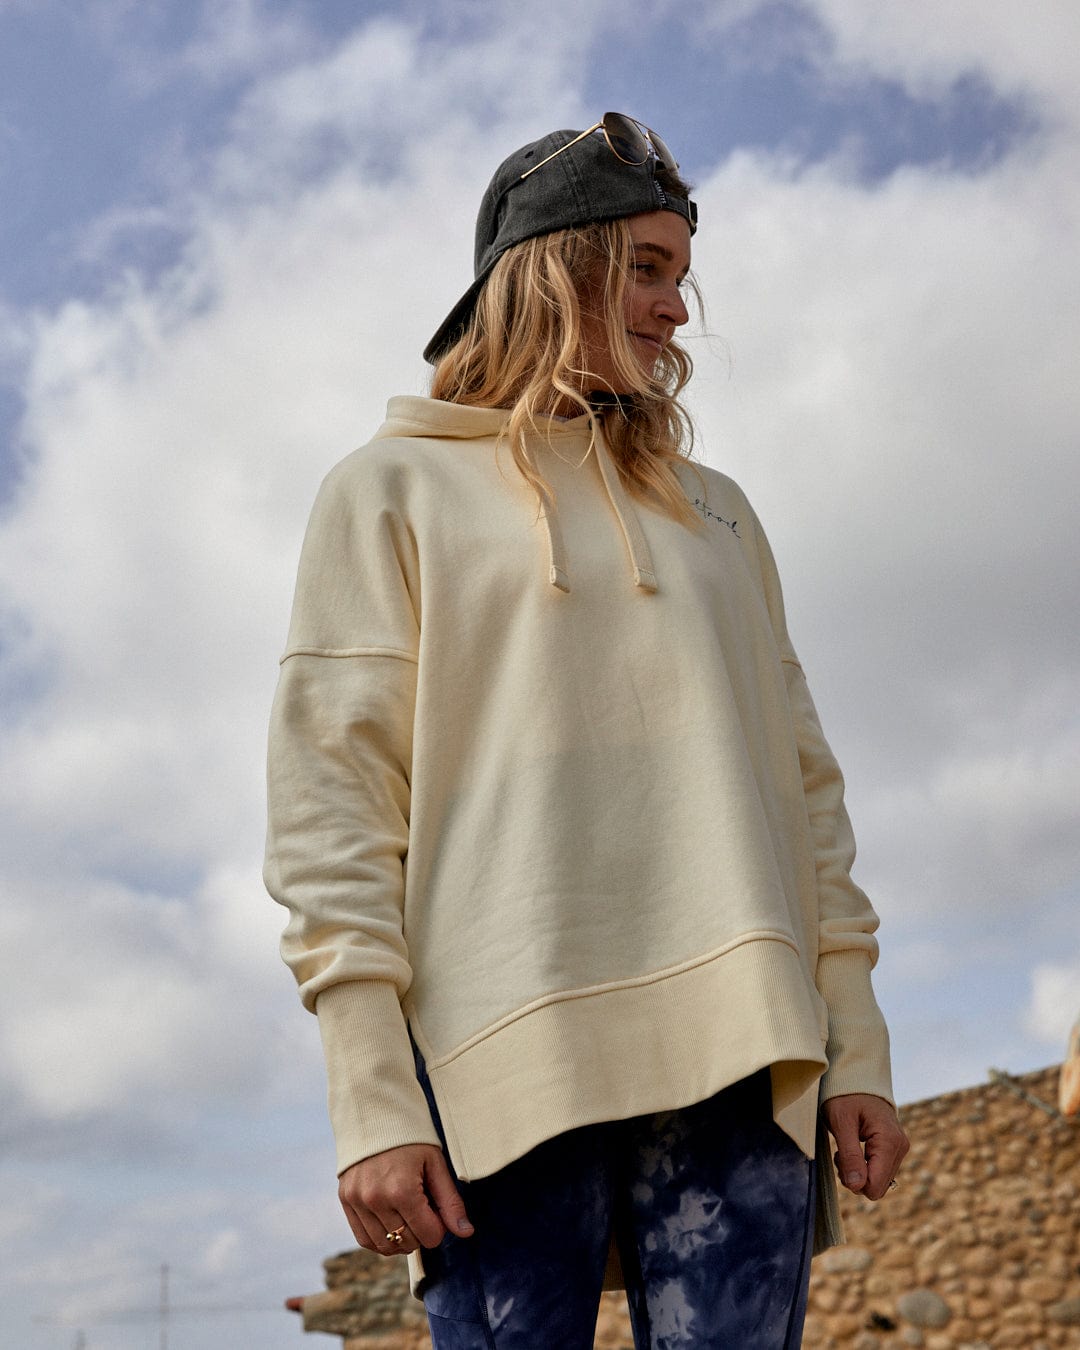 Person in Womens Pop Hoodie in Cream and Saltrock branding cap standing outdoors with cloudy skies in the background.